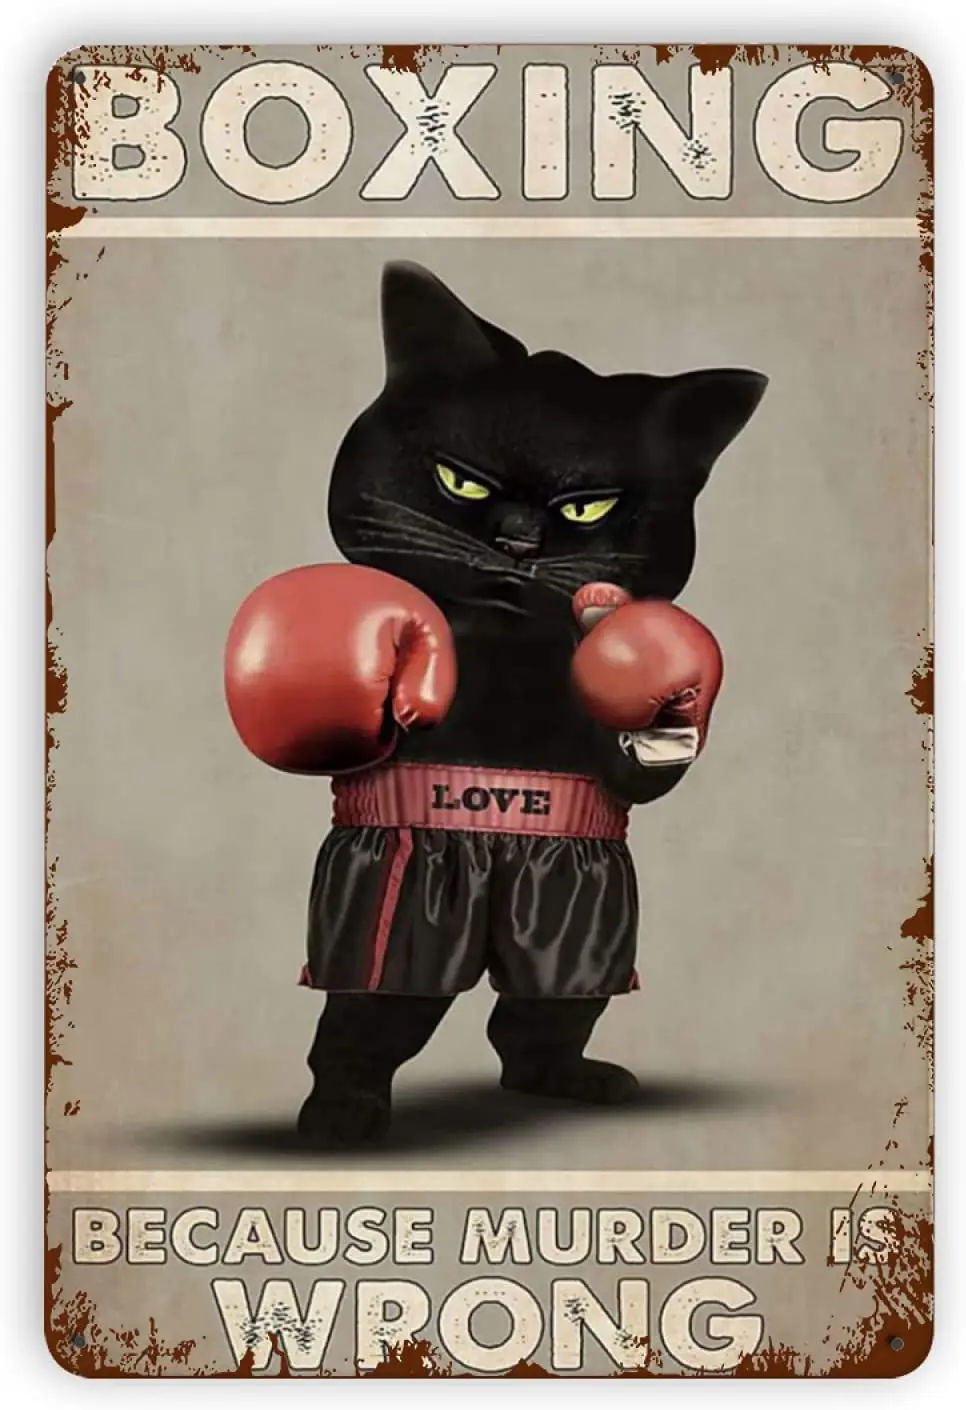 

Kitten Retro Metal Sign - Boxing Because Murder is Wrong Black Cat Vintage Funny Tin Signs Metal Poster for Home Club Cafe Bar